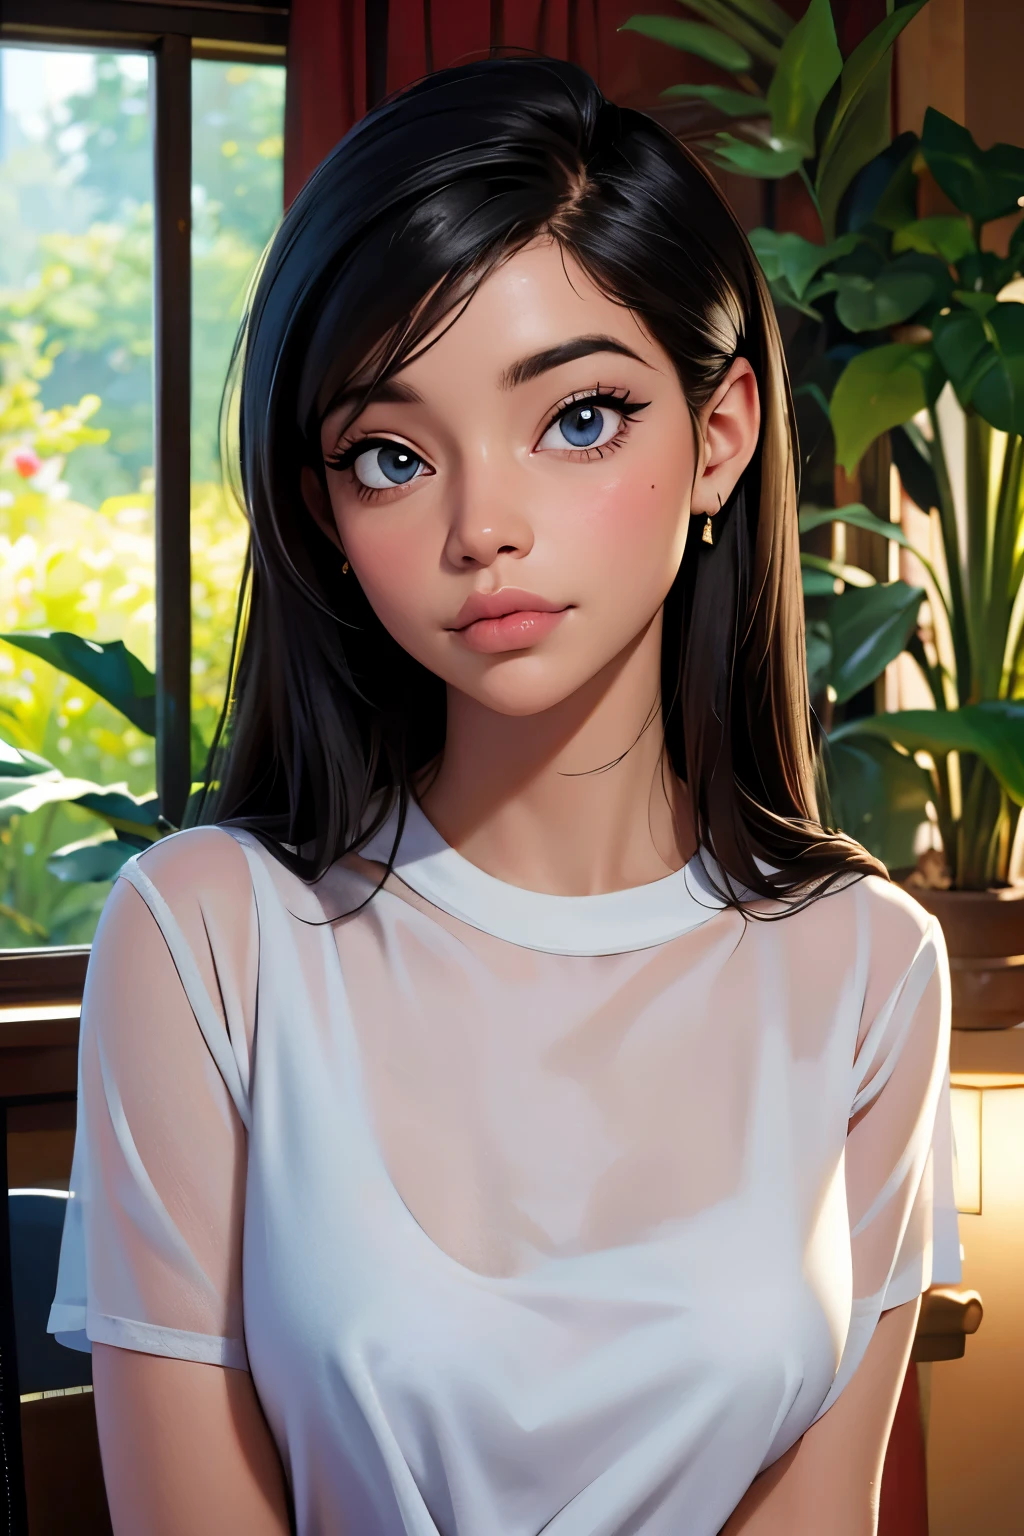 (best quality,4k,8k,highres,masterpiece:1.2),ultra-detailed,(realistic,photorealistic,photo-realistic:1.37),A girl in a garden,portraits,beautiful detailed eyes,beautiful detailed lips,extremely detailed eyes and face,longeyelashes,natural lighting,greenery,peaceful ambiance,flowing dress,flying hair,gentle sunlight,vivid colors,aesthetic composition,soft shadows,subtle breeze,serene expression,relaxed posture,harmonious background,dreamy atmosphere, dressed professionally, in her office, full view